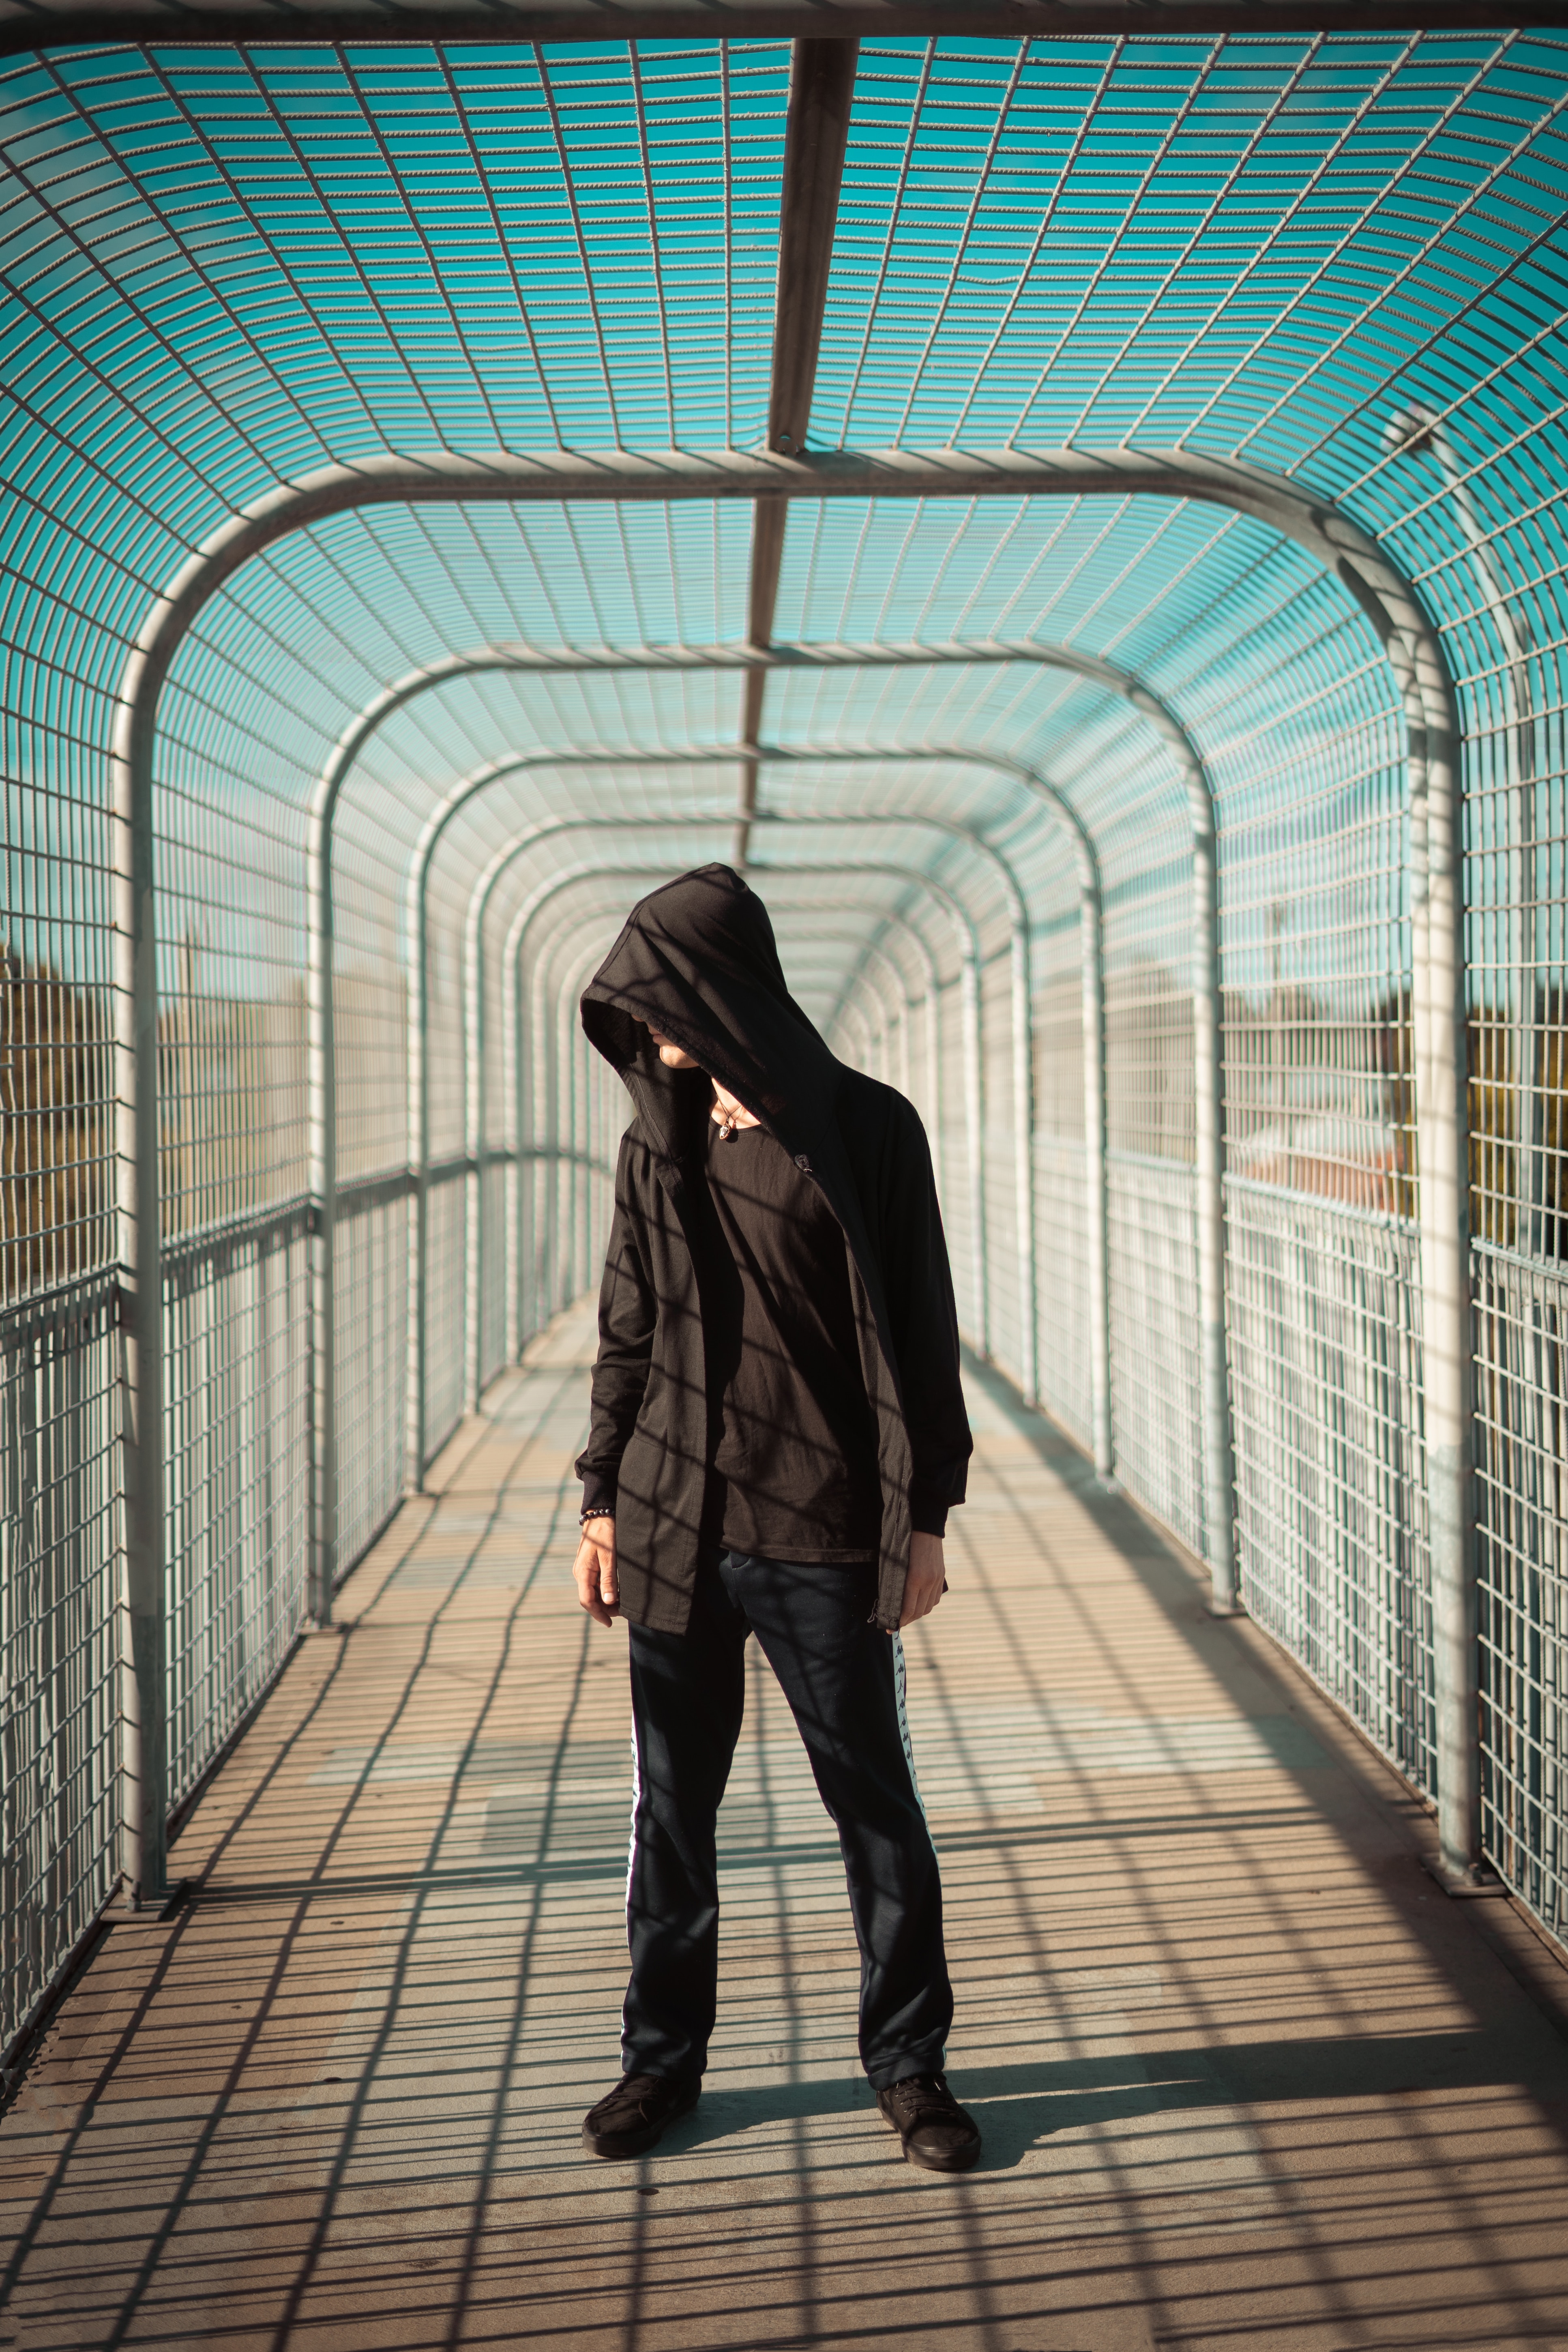 hood, tunnel, miscellanea, miscellaneous, bridge, human, person wallpapers for tablet